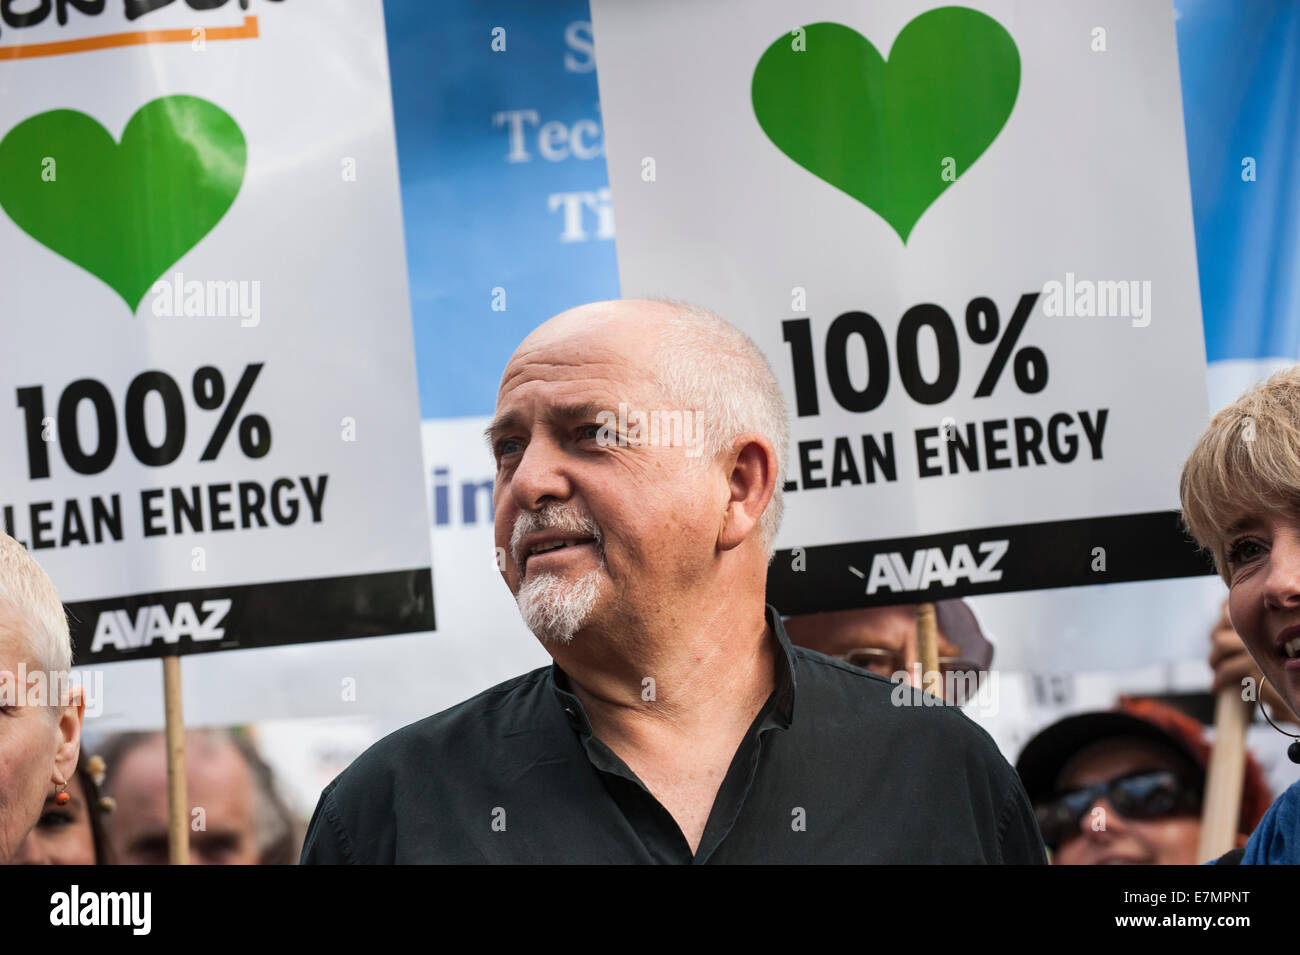 London, UK. 21st Sep, 2014. Musician Peter Gabriel marches with protesters at the Climate Change demonstration, London, 21st September 2014. Credit:  Sue Cunningham Photographic/Alamy Live News Stock Photo